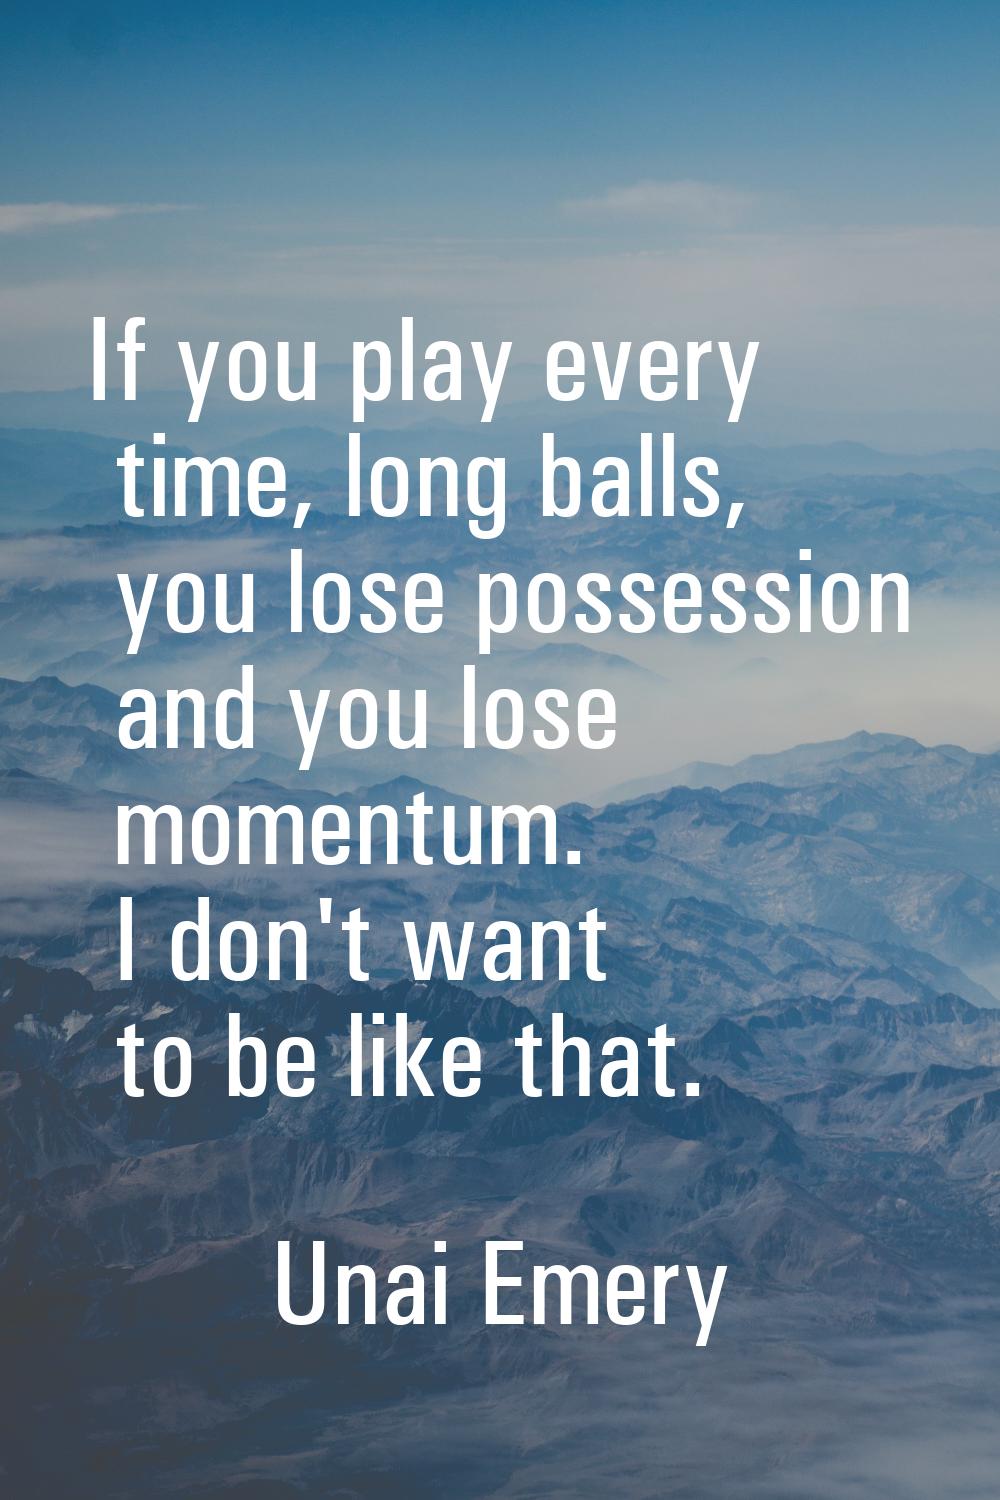 If you play every time, long balls, you lose possession and you lose momentum. I don't want to be l